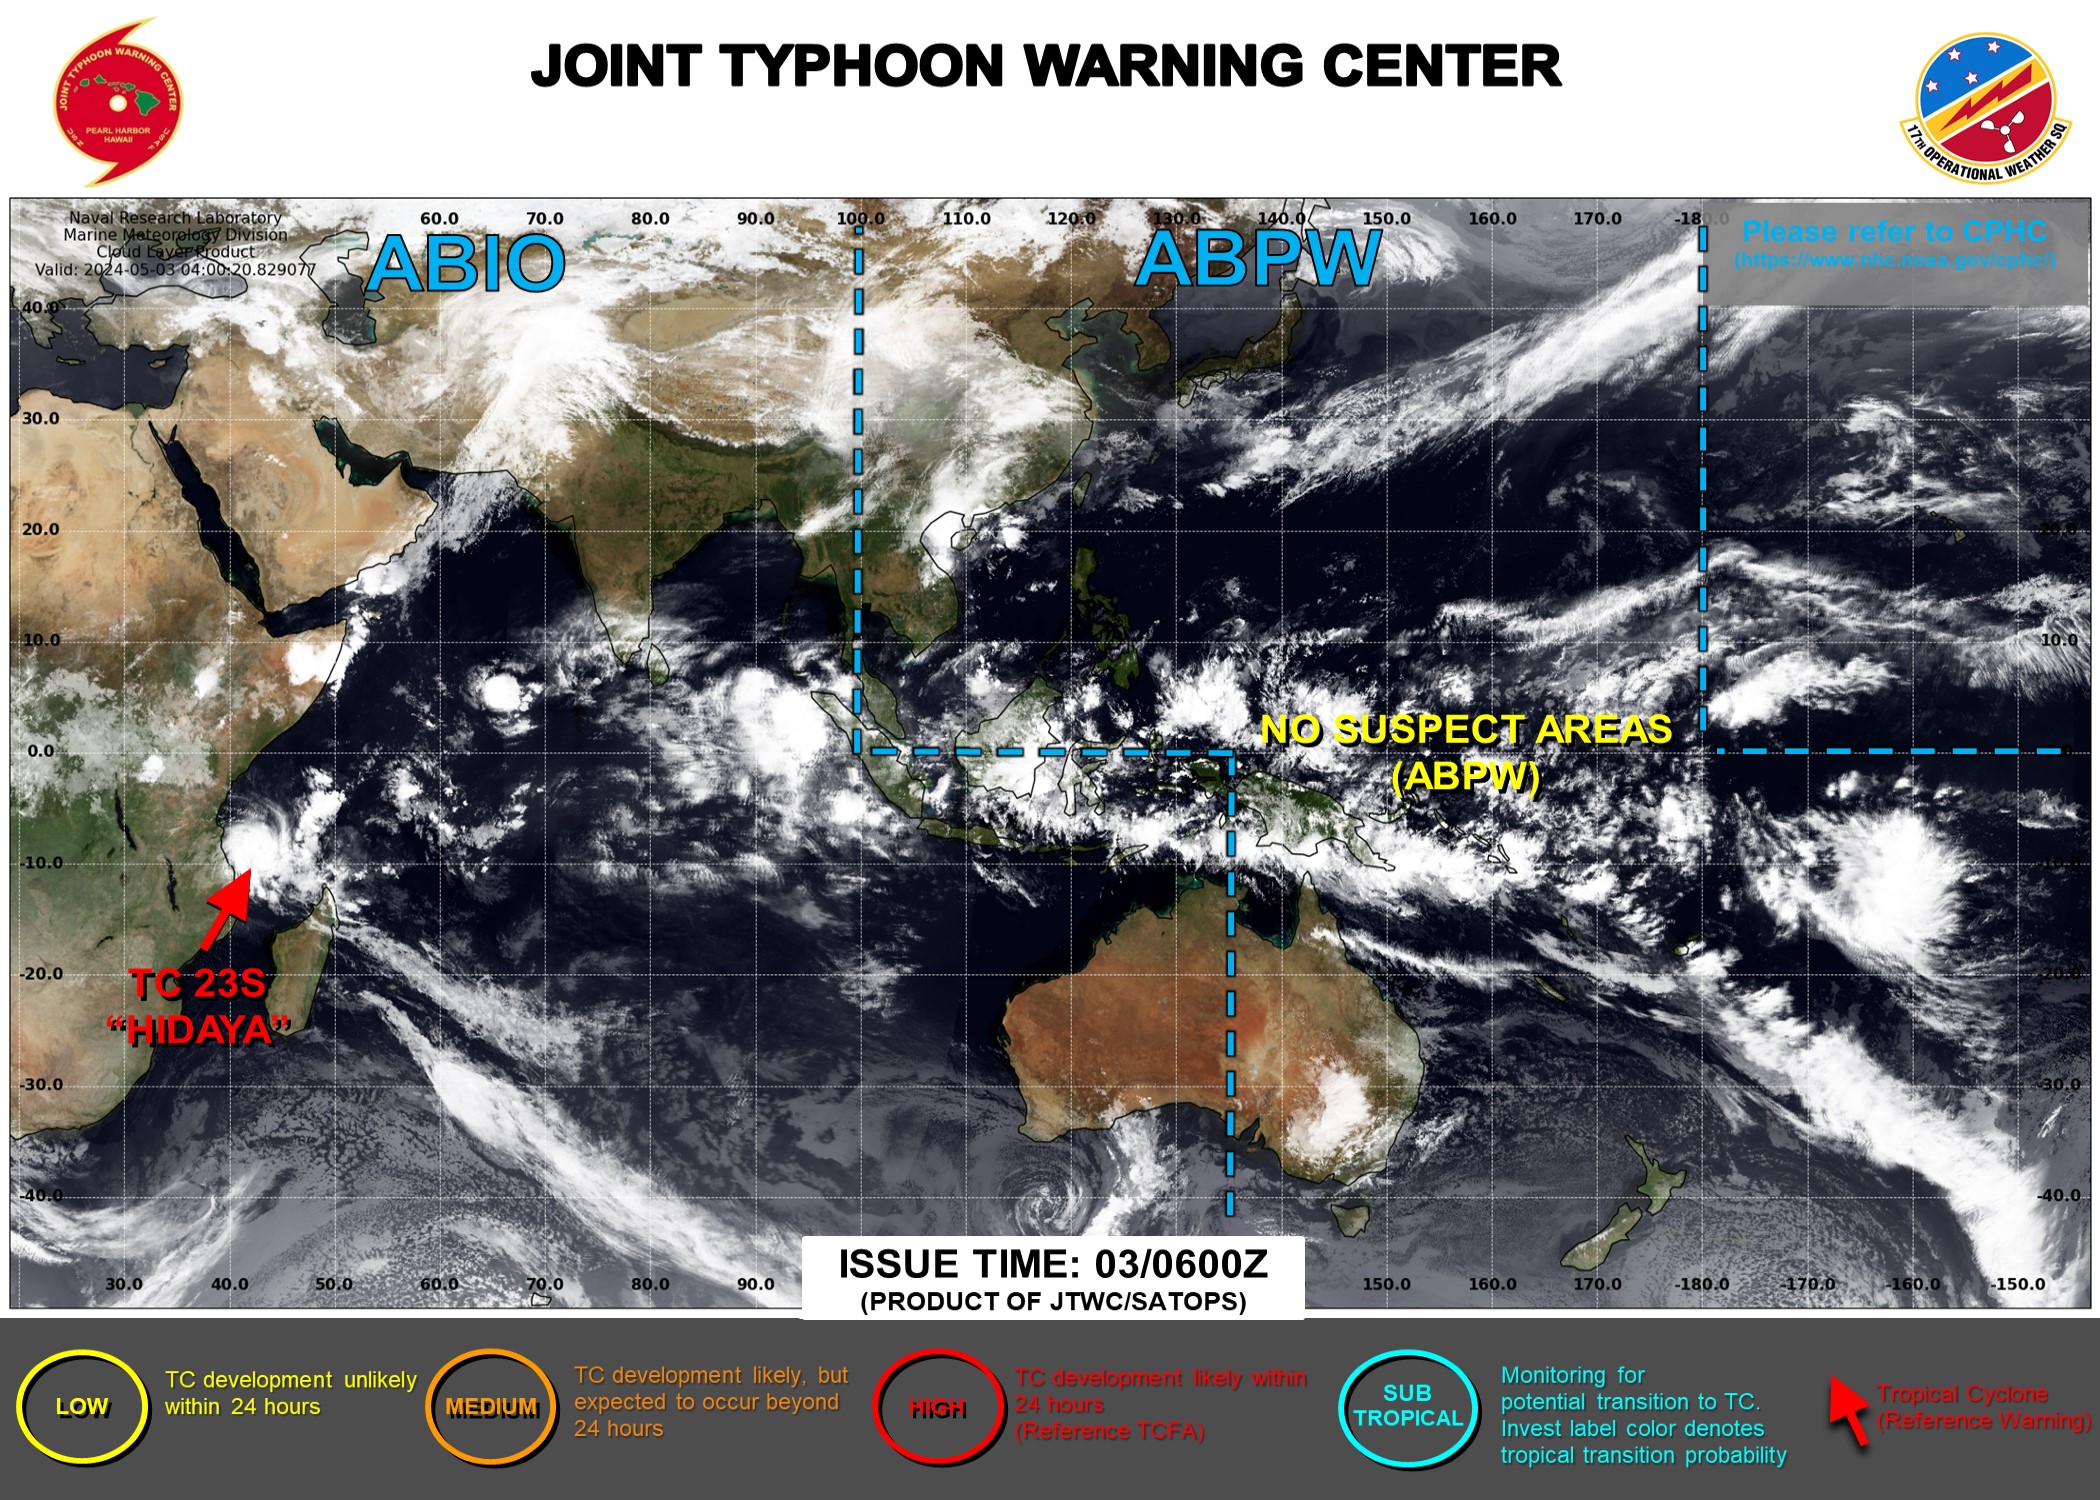 JTWC IS ISSUING 12HOURLY WARNINGS AND 3HOURLY SATELLITE BULLETINS ON TC 23S(HIDAYA)